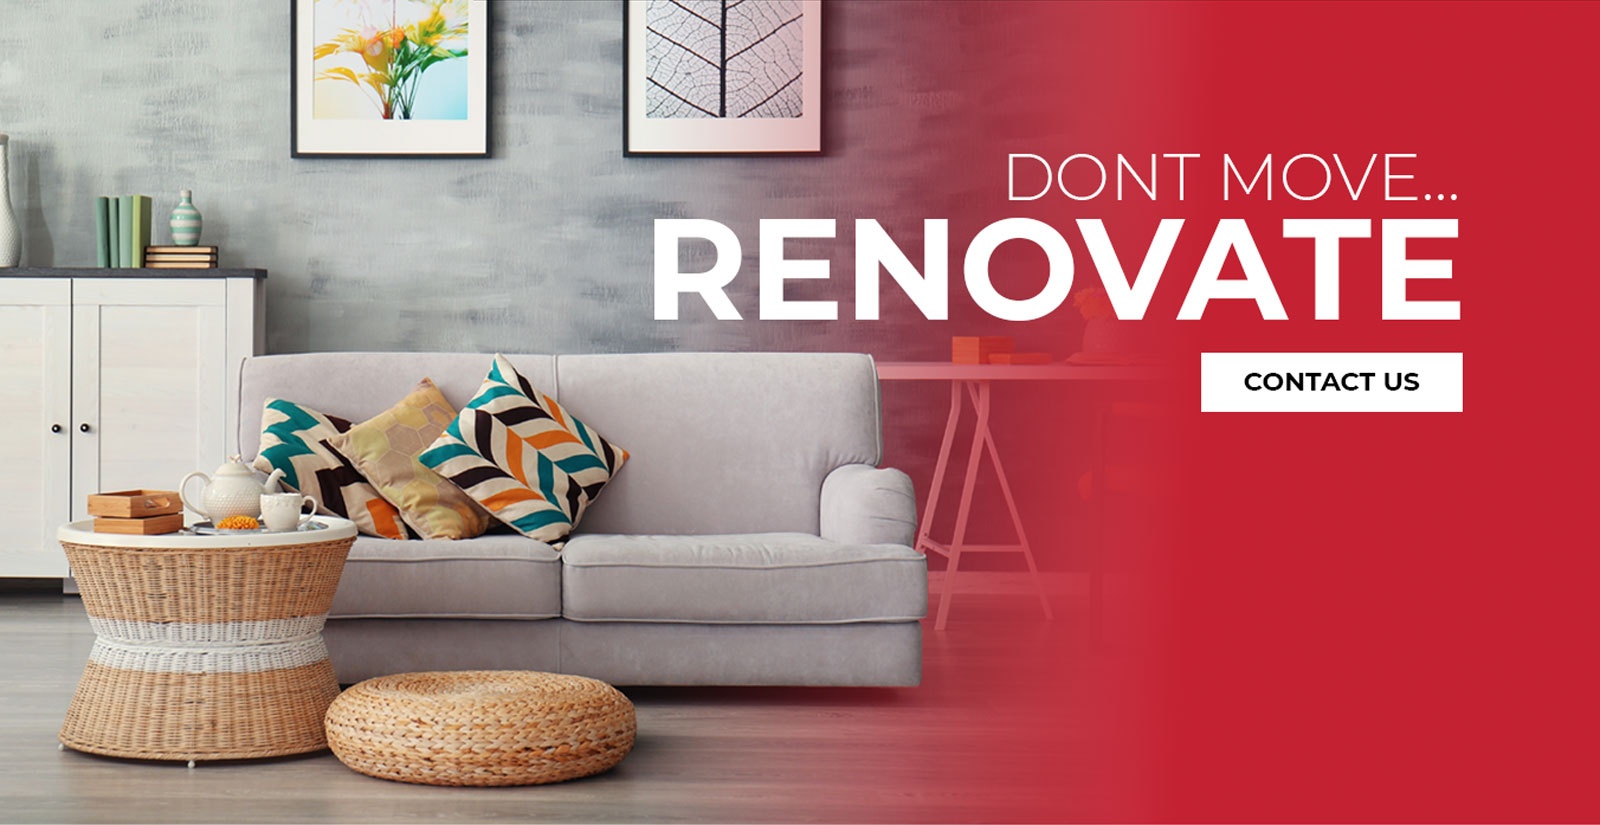 Dont move, Renovate - Renovation Services Burlington by Viva Renovations and Contracting Inc.